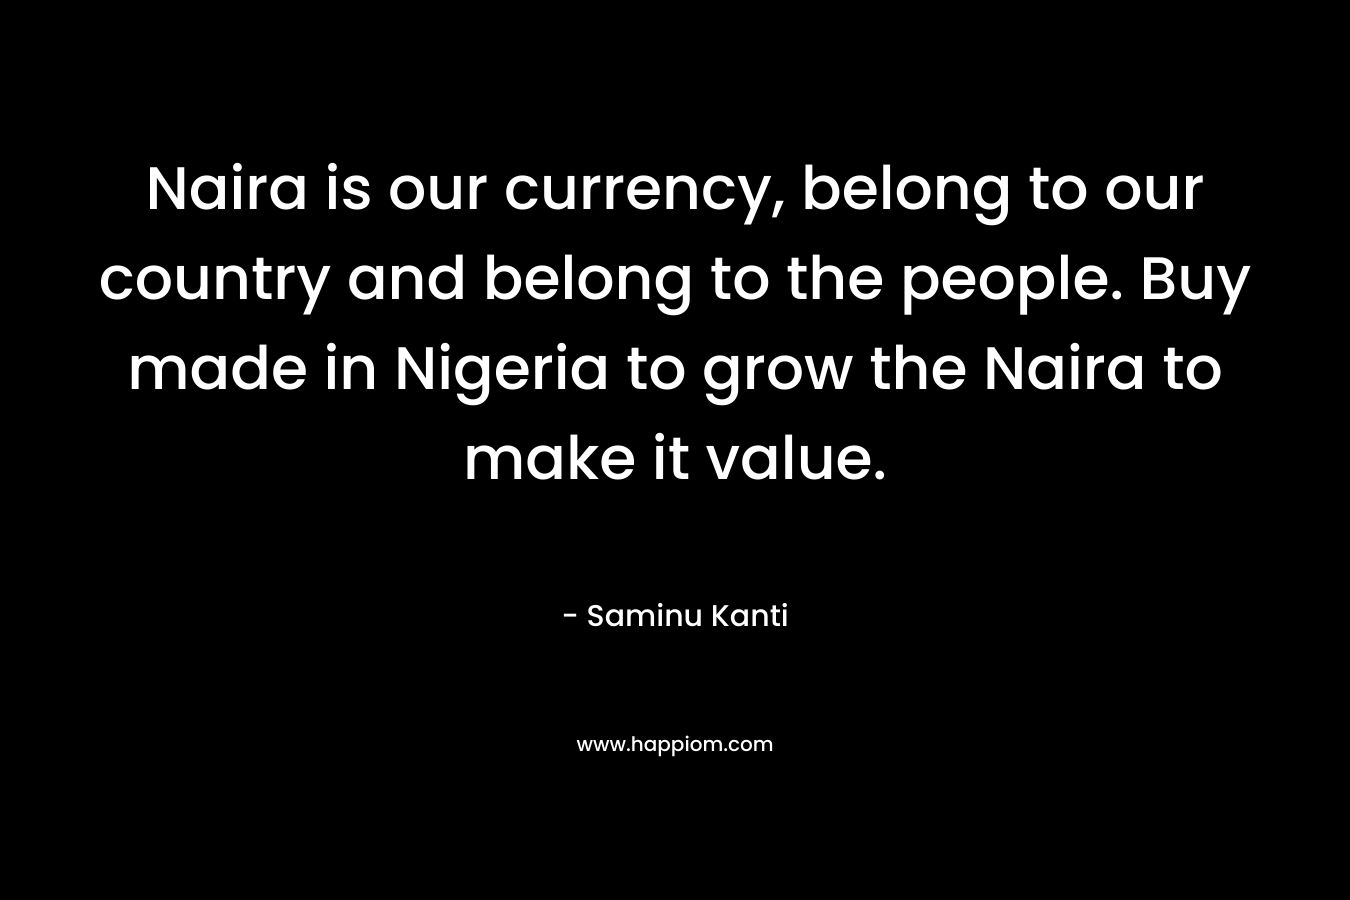 Naira is our currency, belong to our country and belong to the people. Buy made in Nigeria to grow the Naira to make it value. – Saminu Kanti